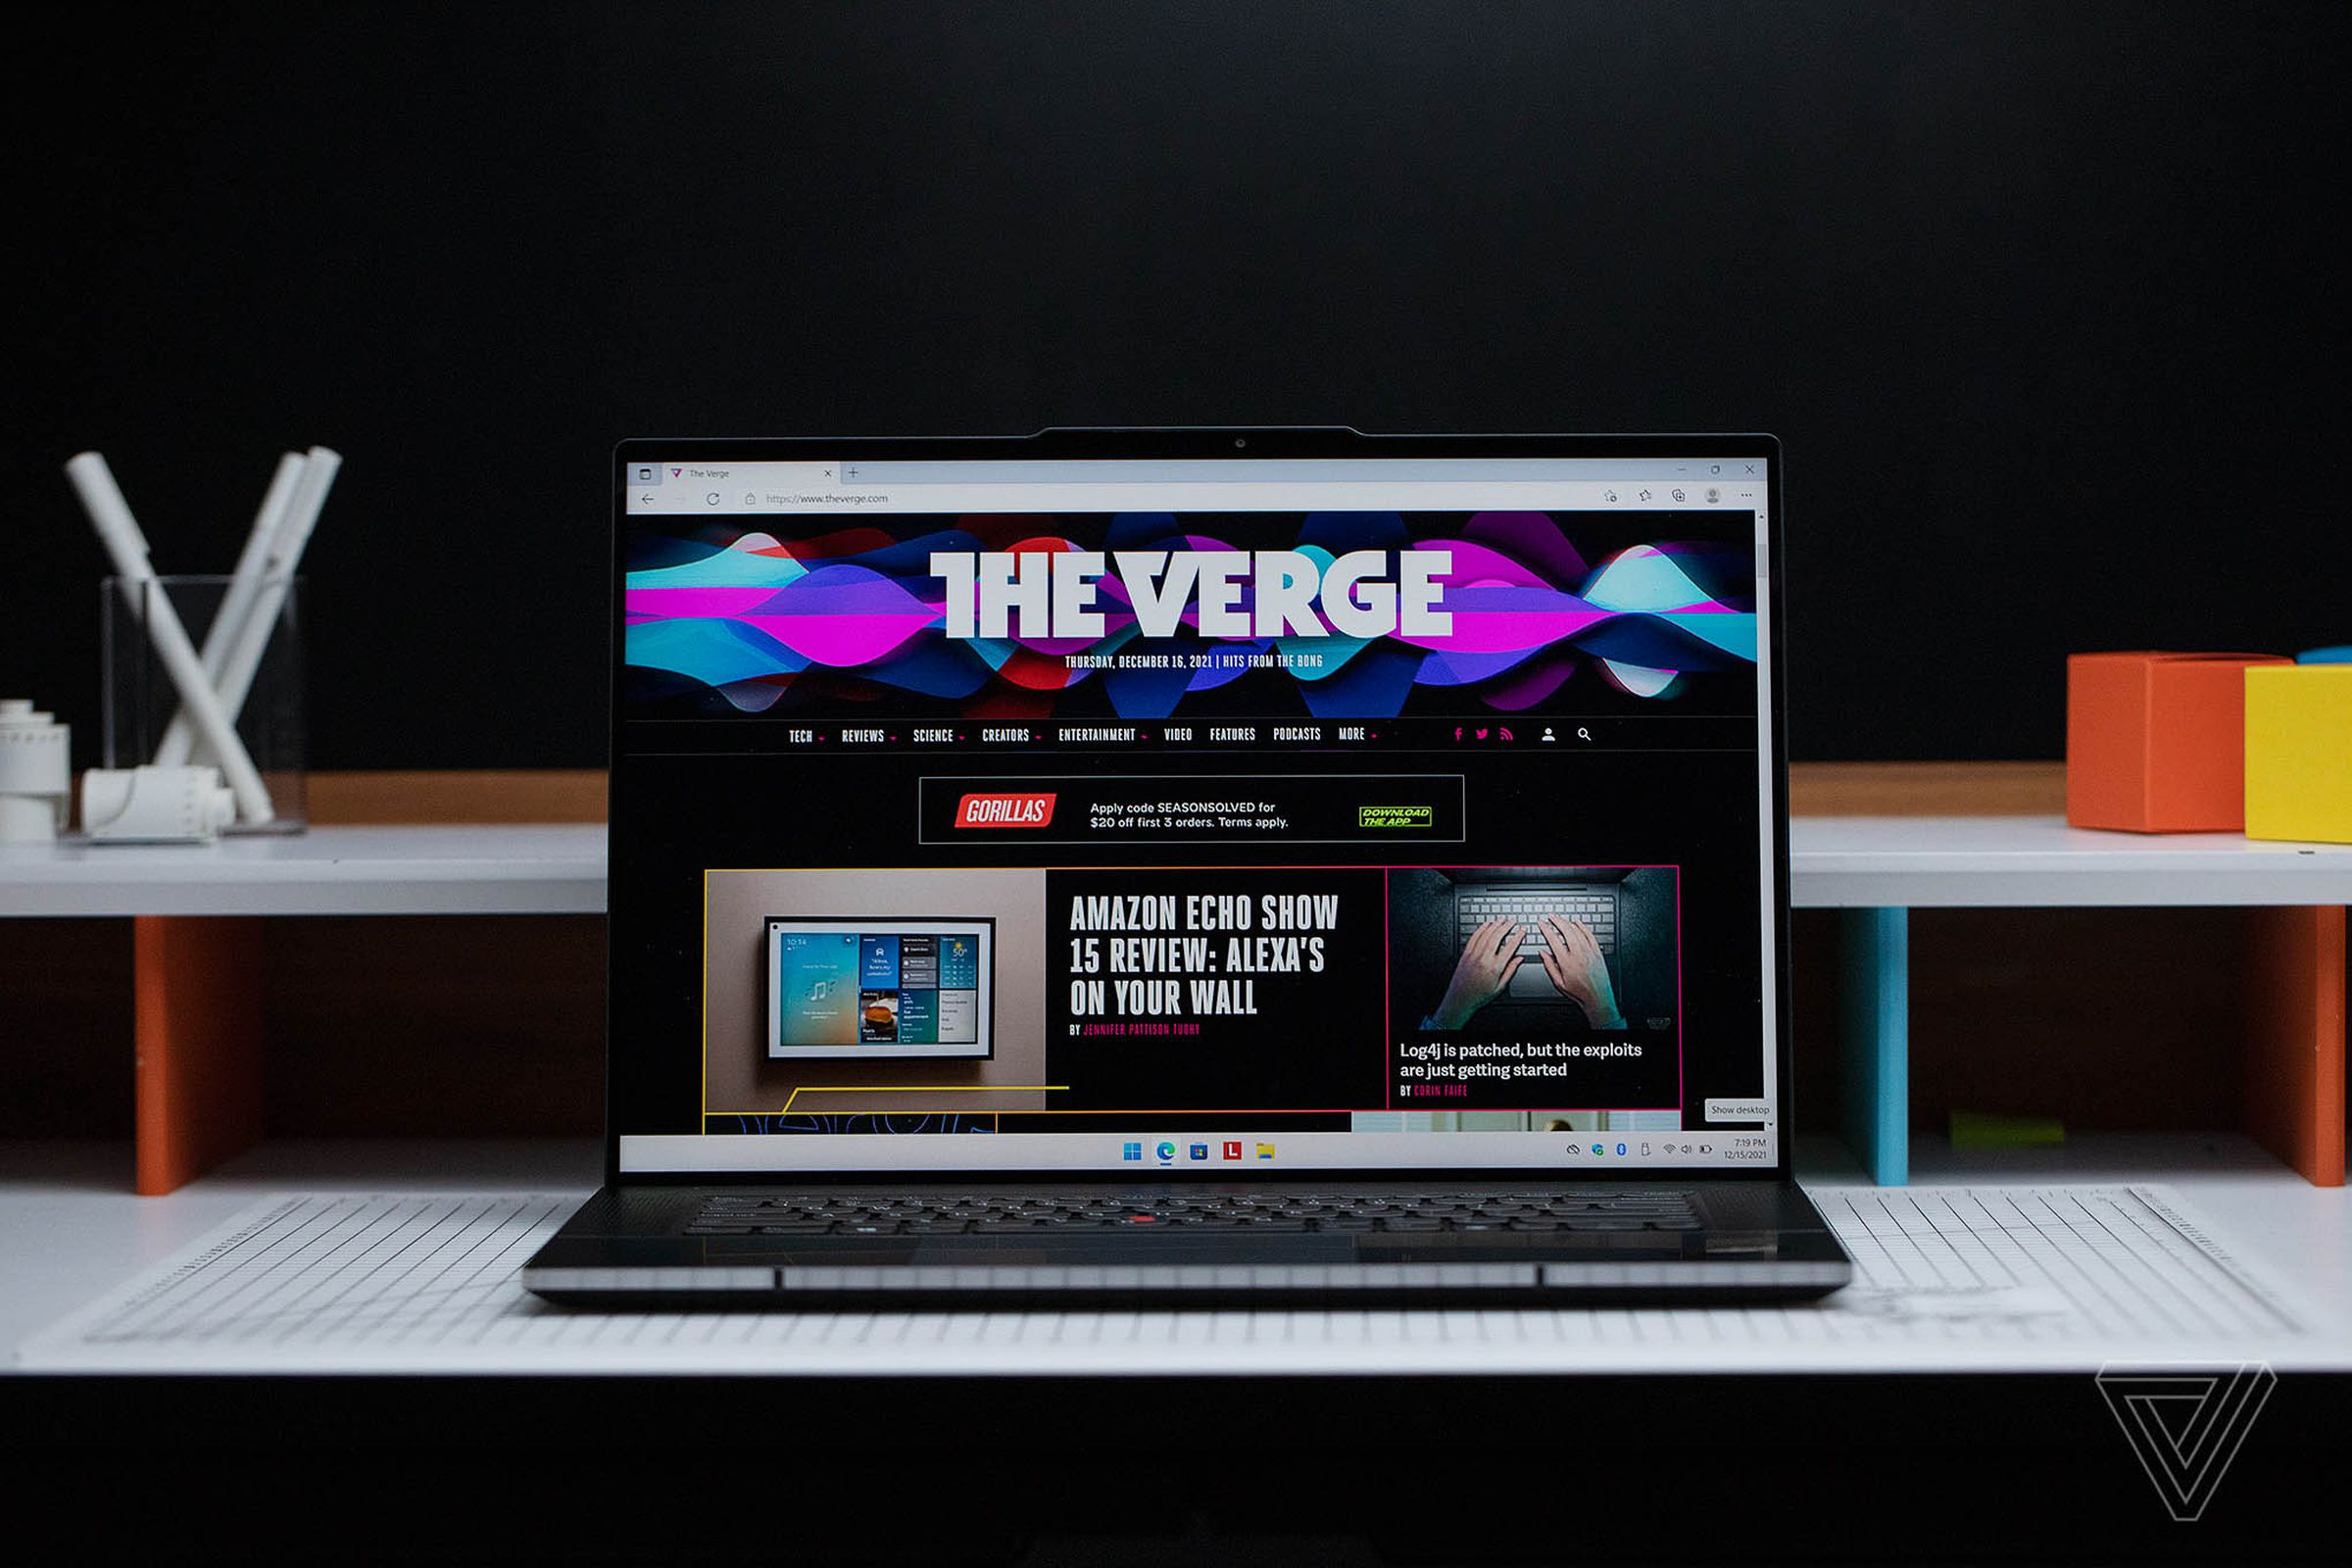 The ThinkPad Z16 open on a gridded table with a black background. The screen displays The Verge homepage.